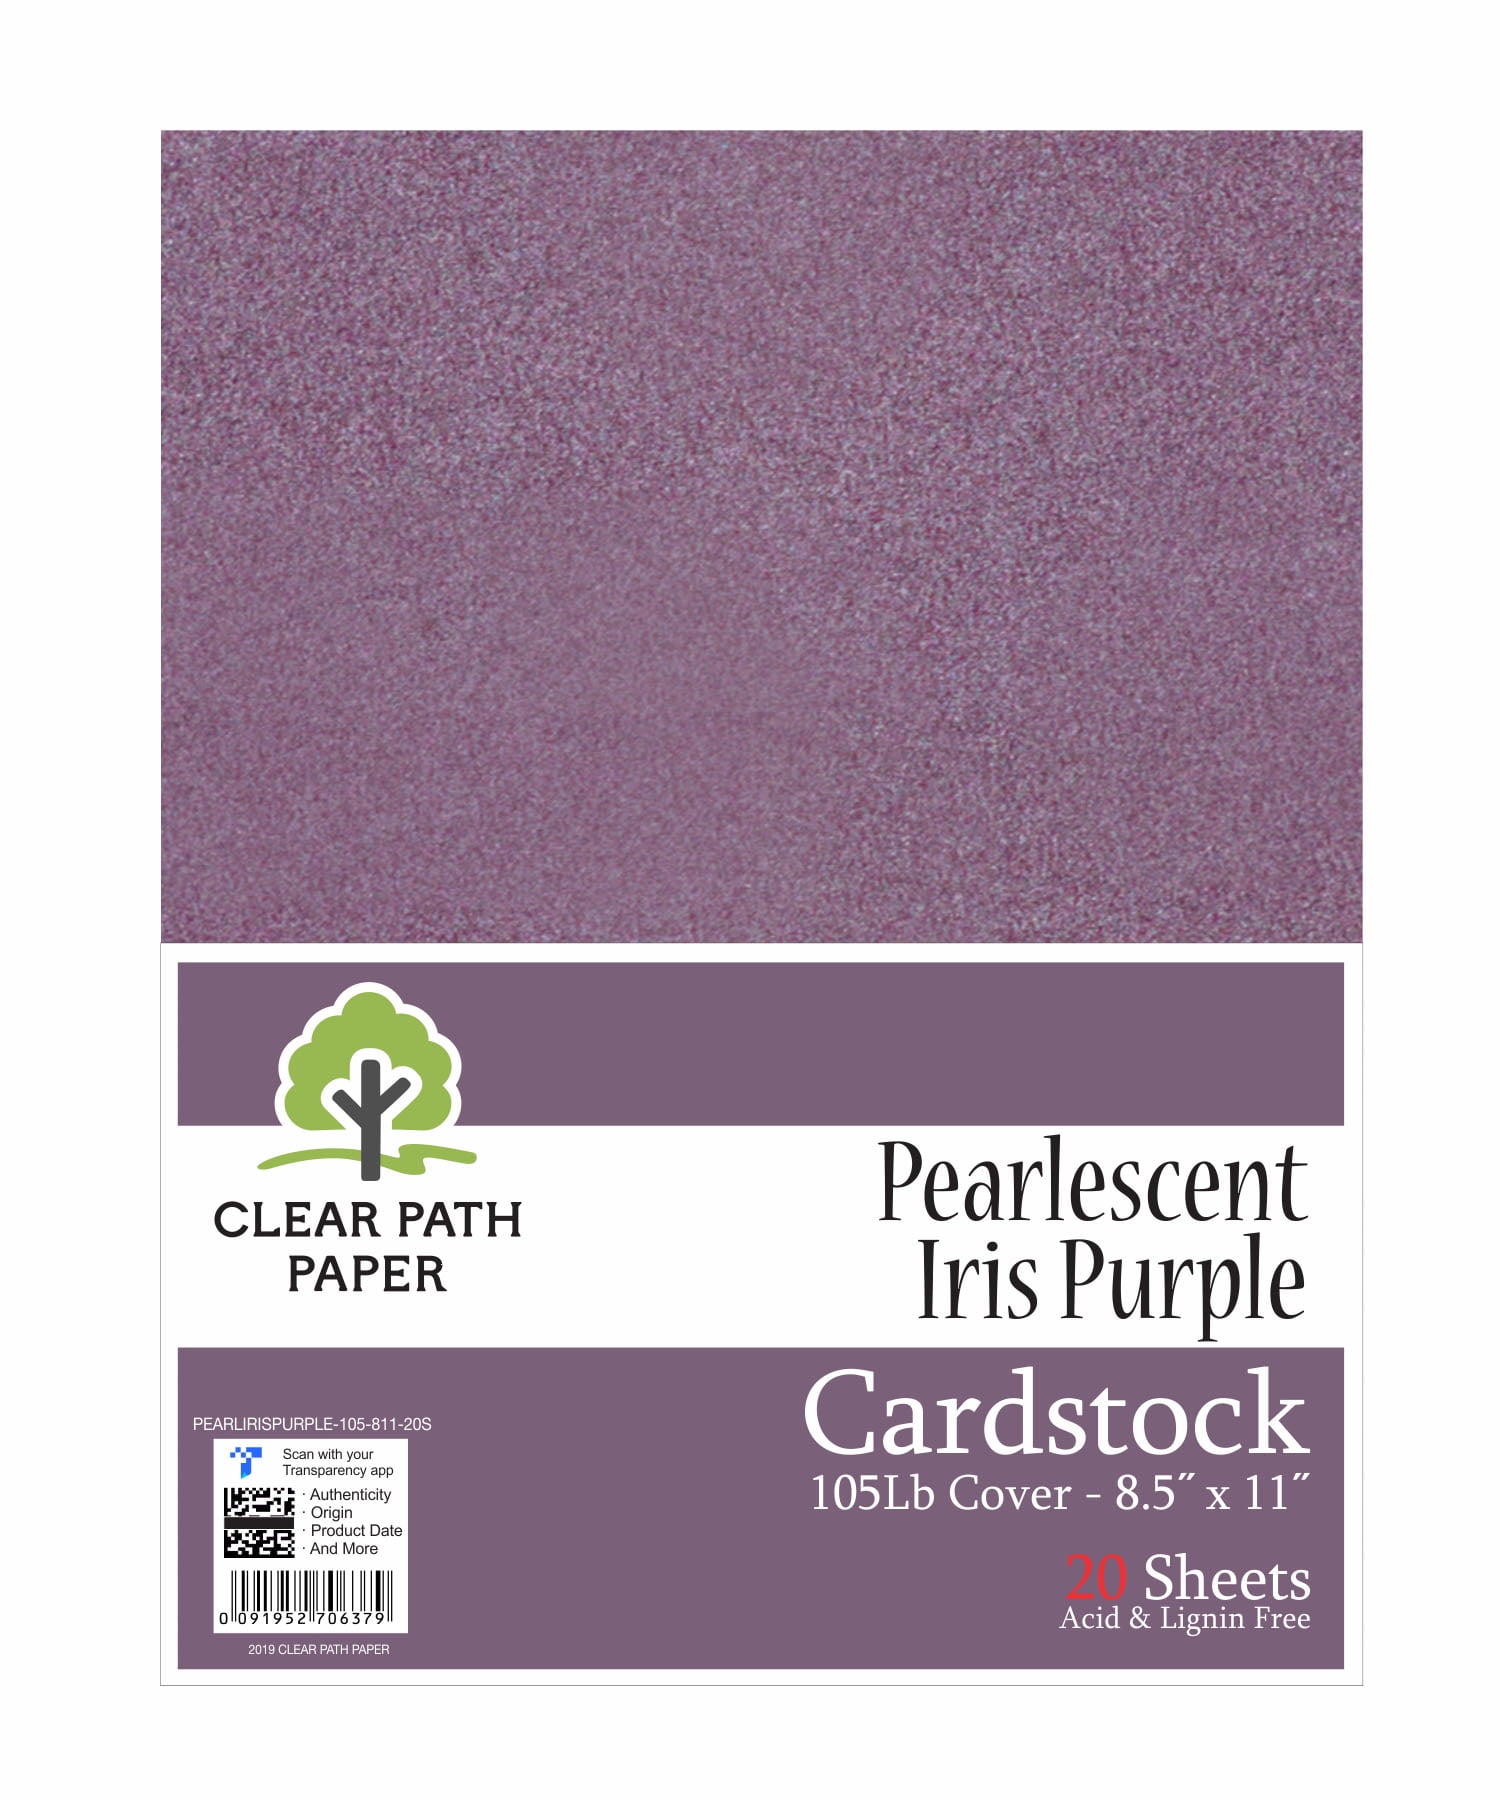 Pearlescent Blue Cardstock - 8.5 x 11 inch - 105Lb Cover - 20 Sheets -  Clear Path Paper 